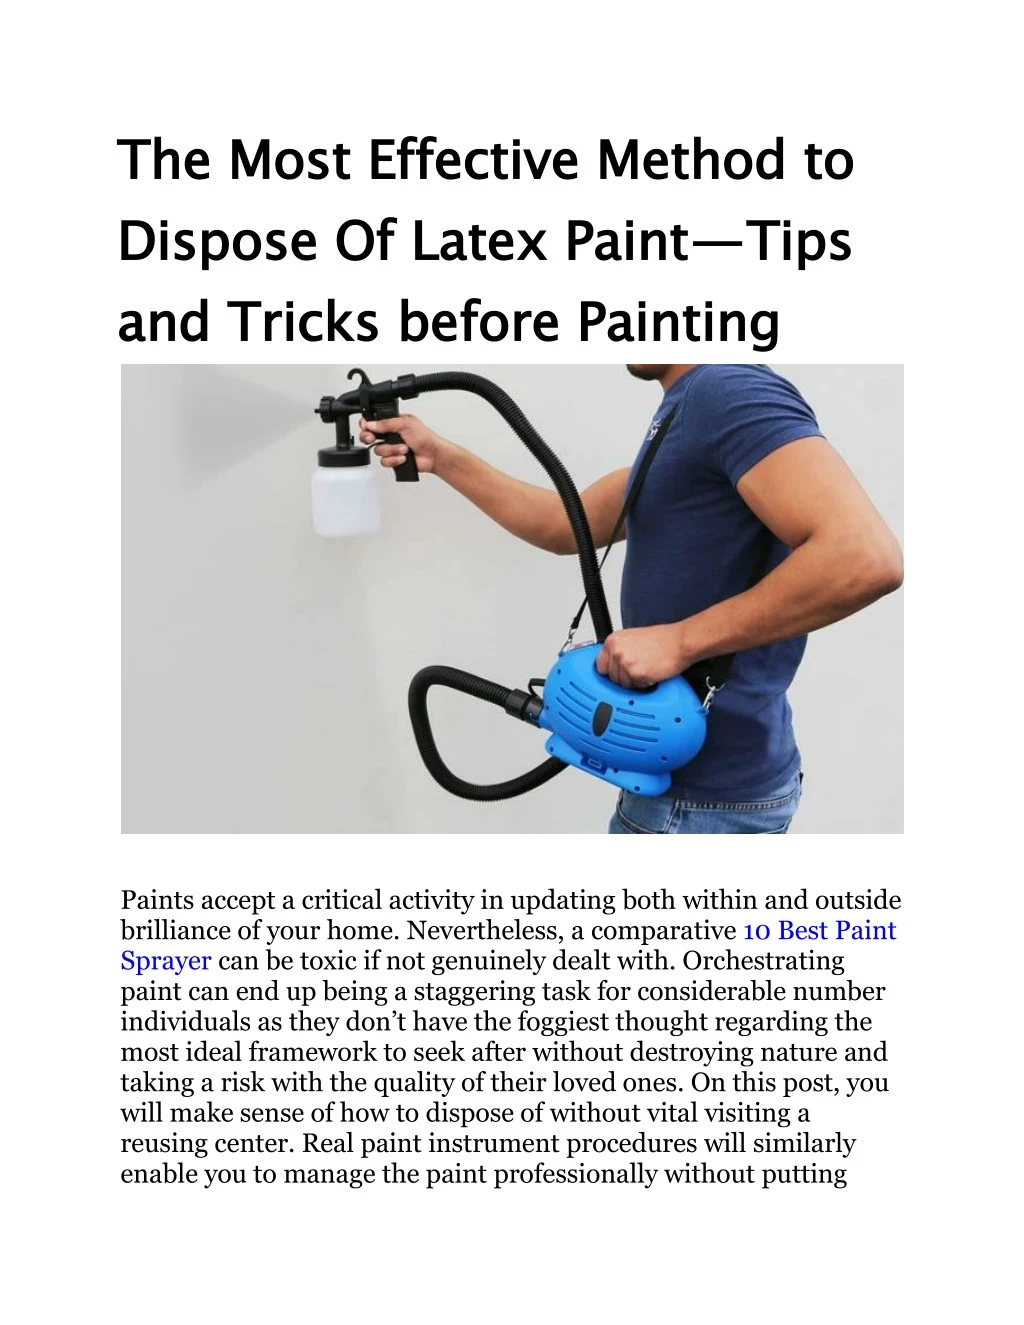 the most effective method to dispose of latex